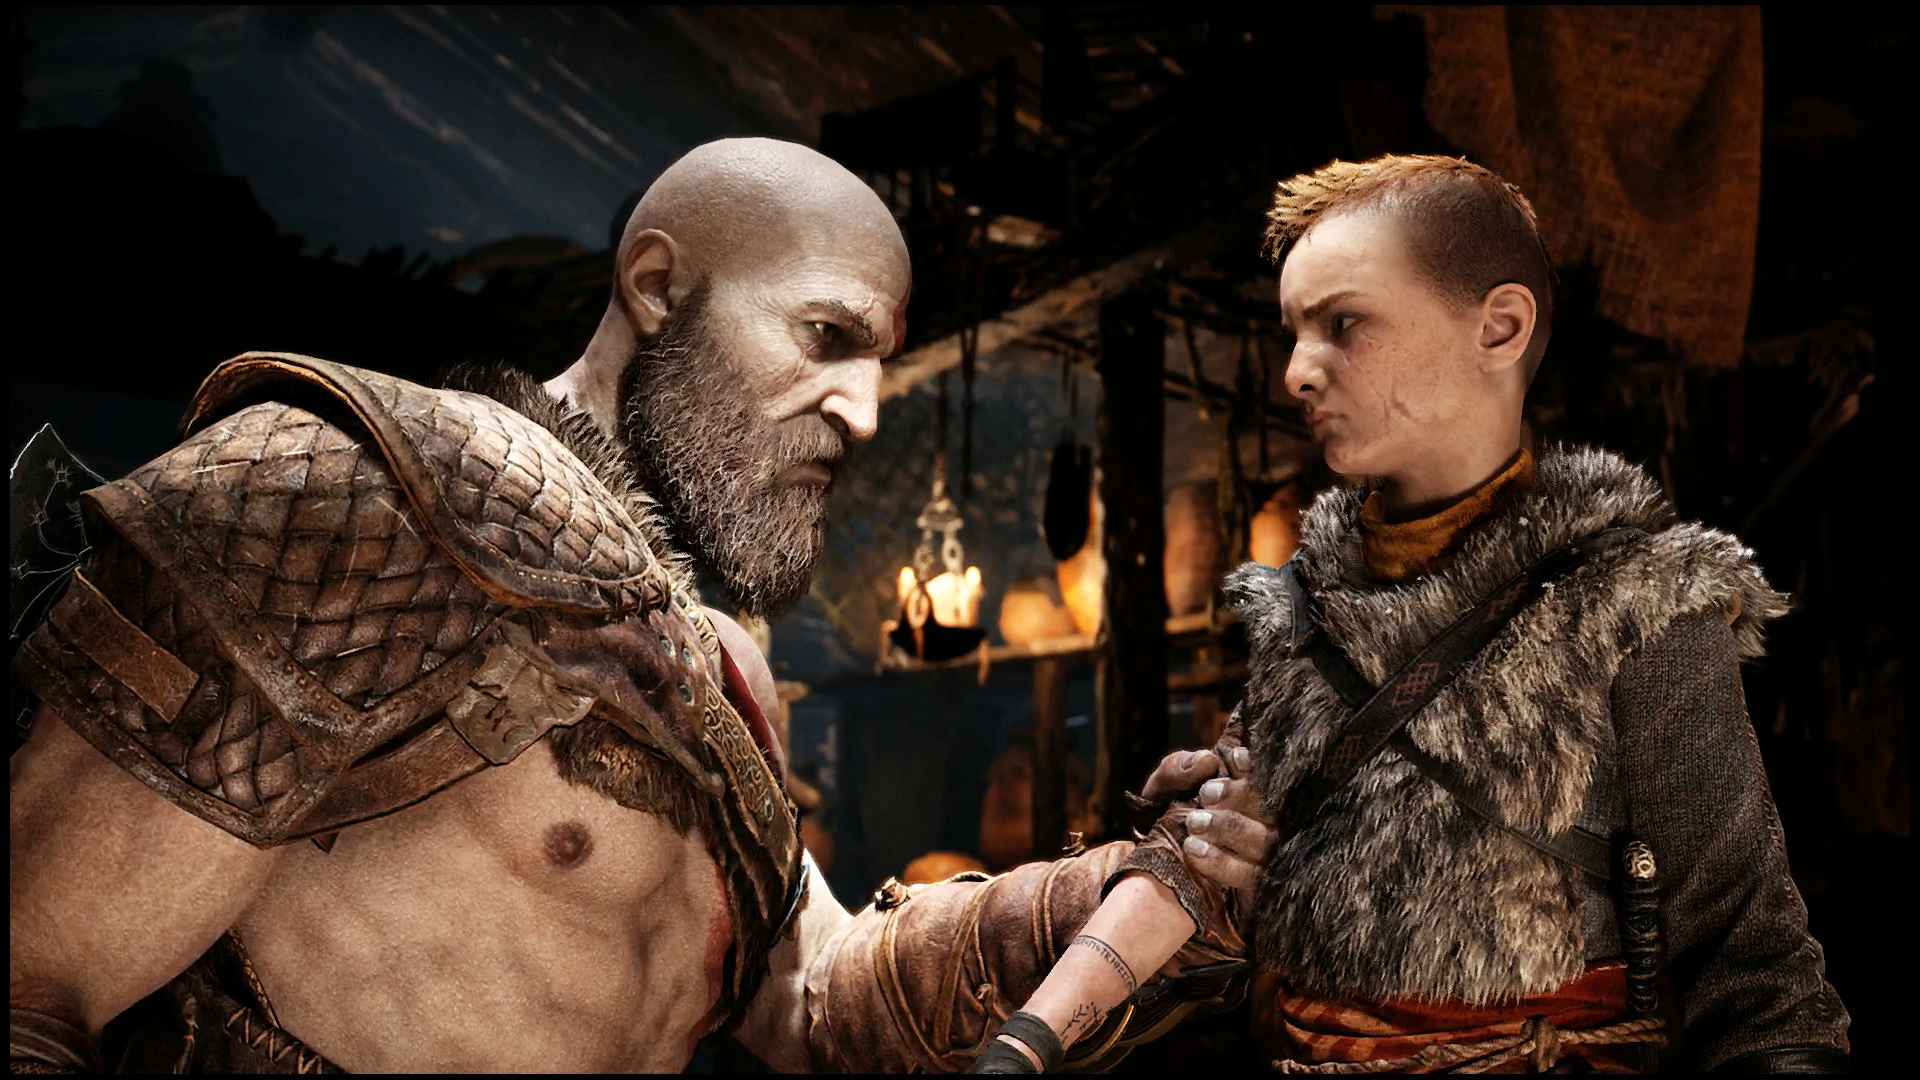 This God of War Mod lets you play as the original Kratos from God